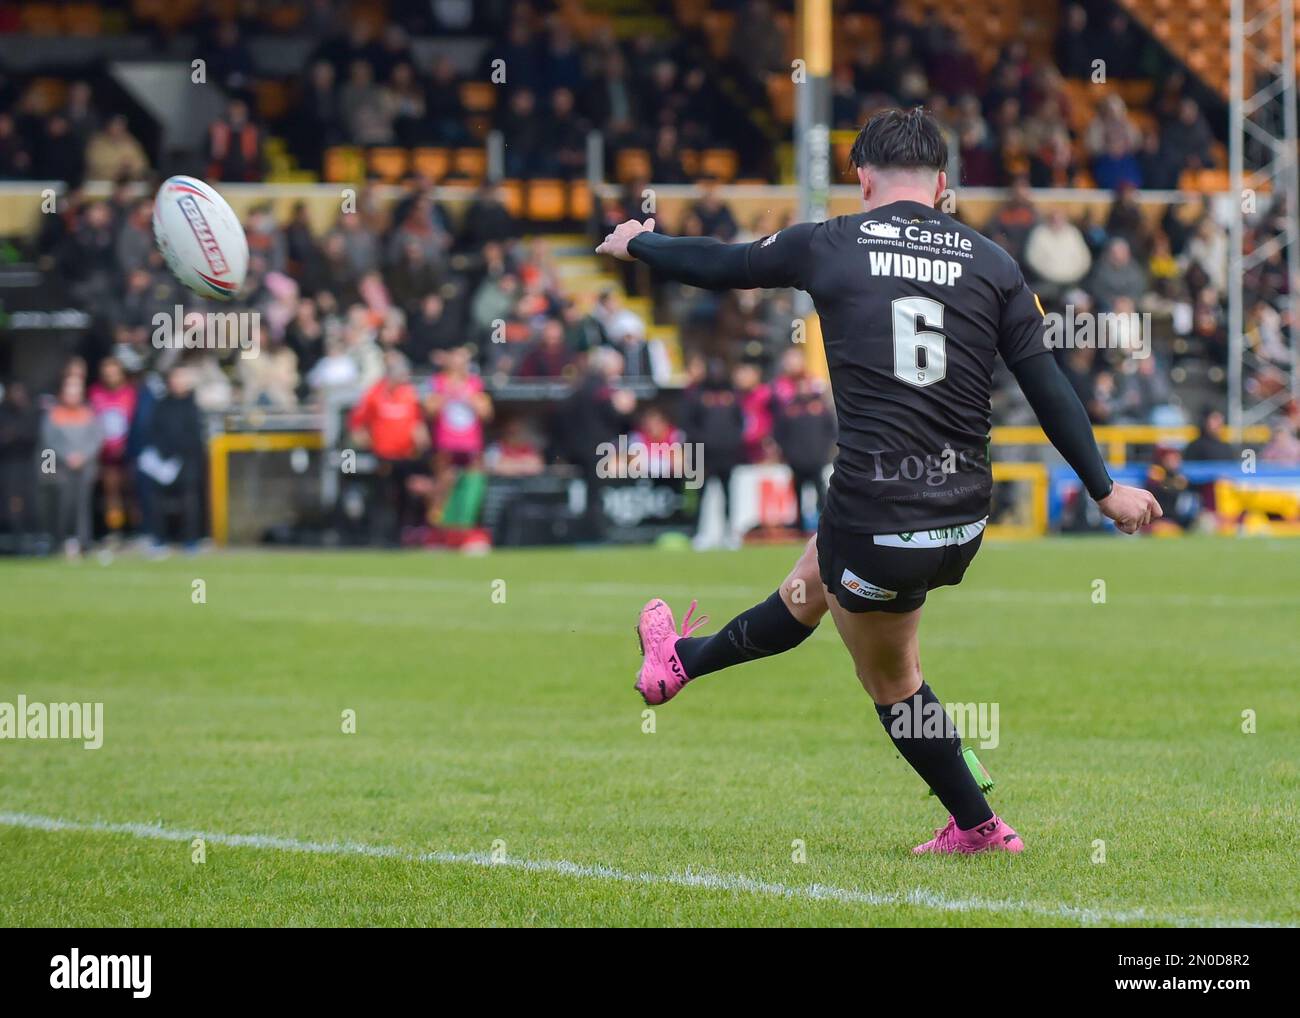 Castleford, UK. 05th Feb, 2023. Gareth Widdop of Castleford Tigers kicks a conversion  Nathan Massey Testimonial, Castleford Tigers v Huddersfield Giants at The Mend-A-Hose Jungle, Castleford West Yorkshire, UK on the 5th February 2023  Photo Credit Craig Cresswell Photography Credit: Craig Cresswell/Alamy Live News Credit: Craig Cresswell/Alamy Live News Stock Photo